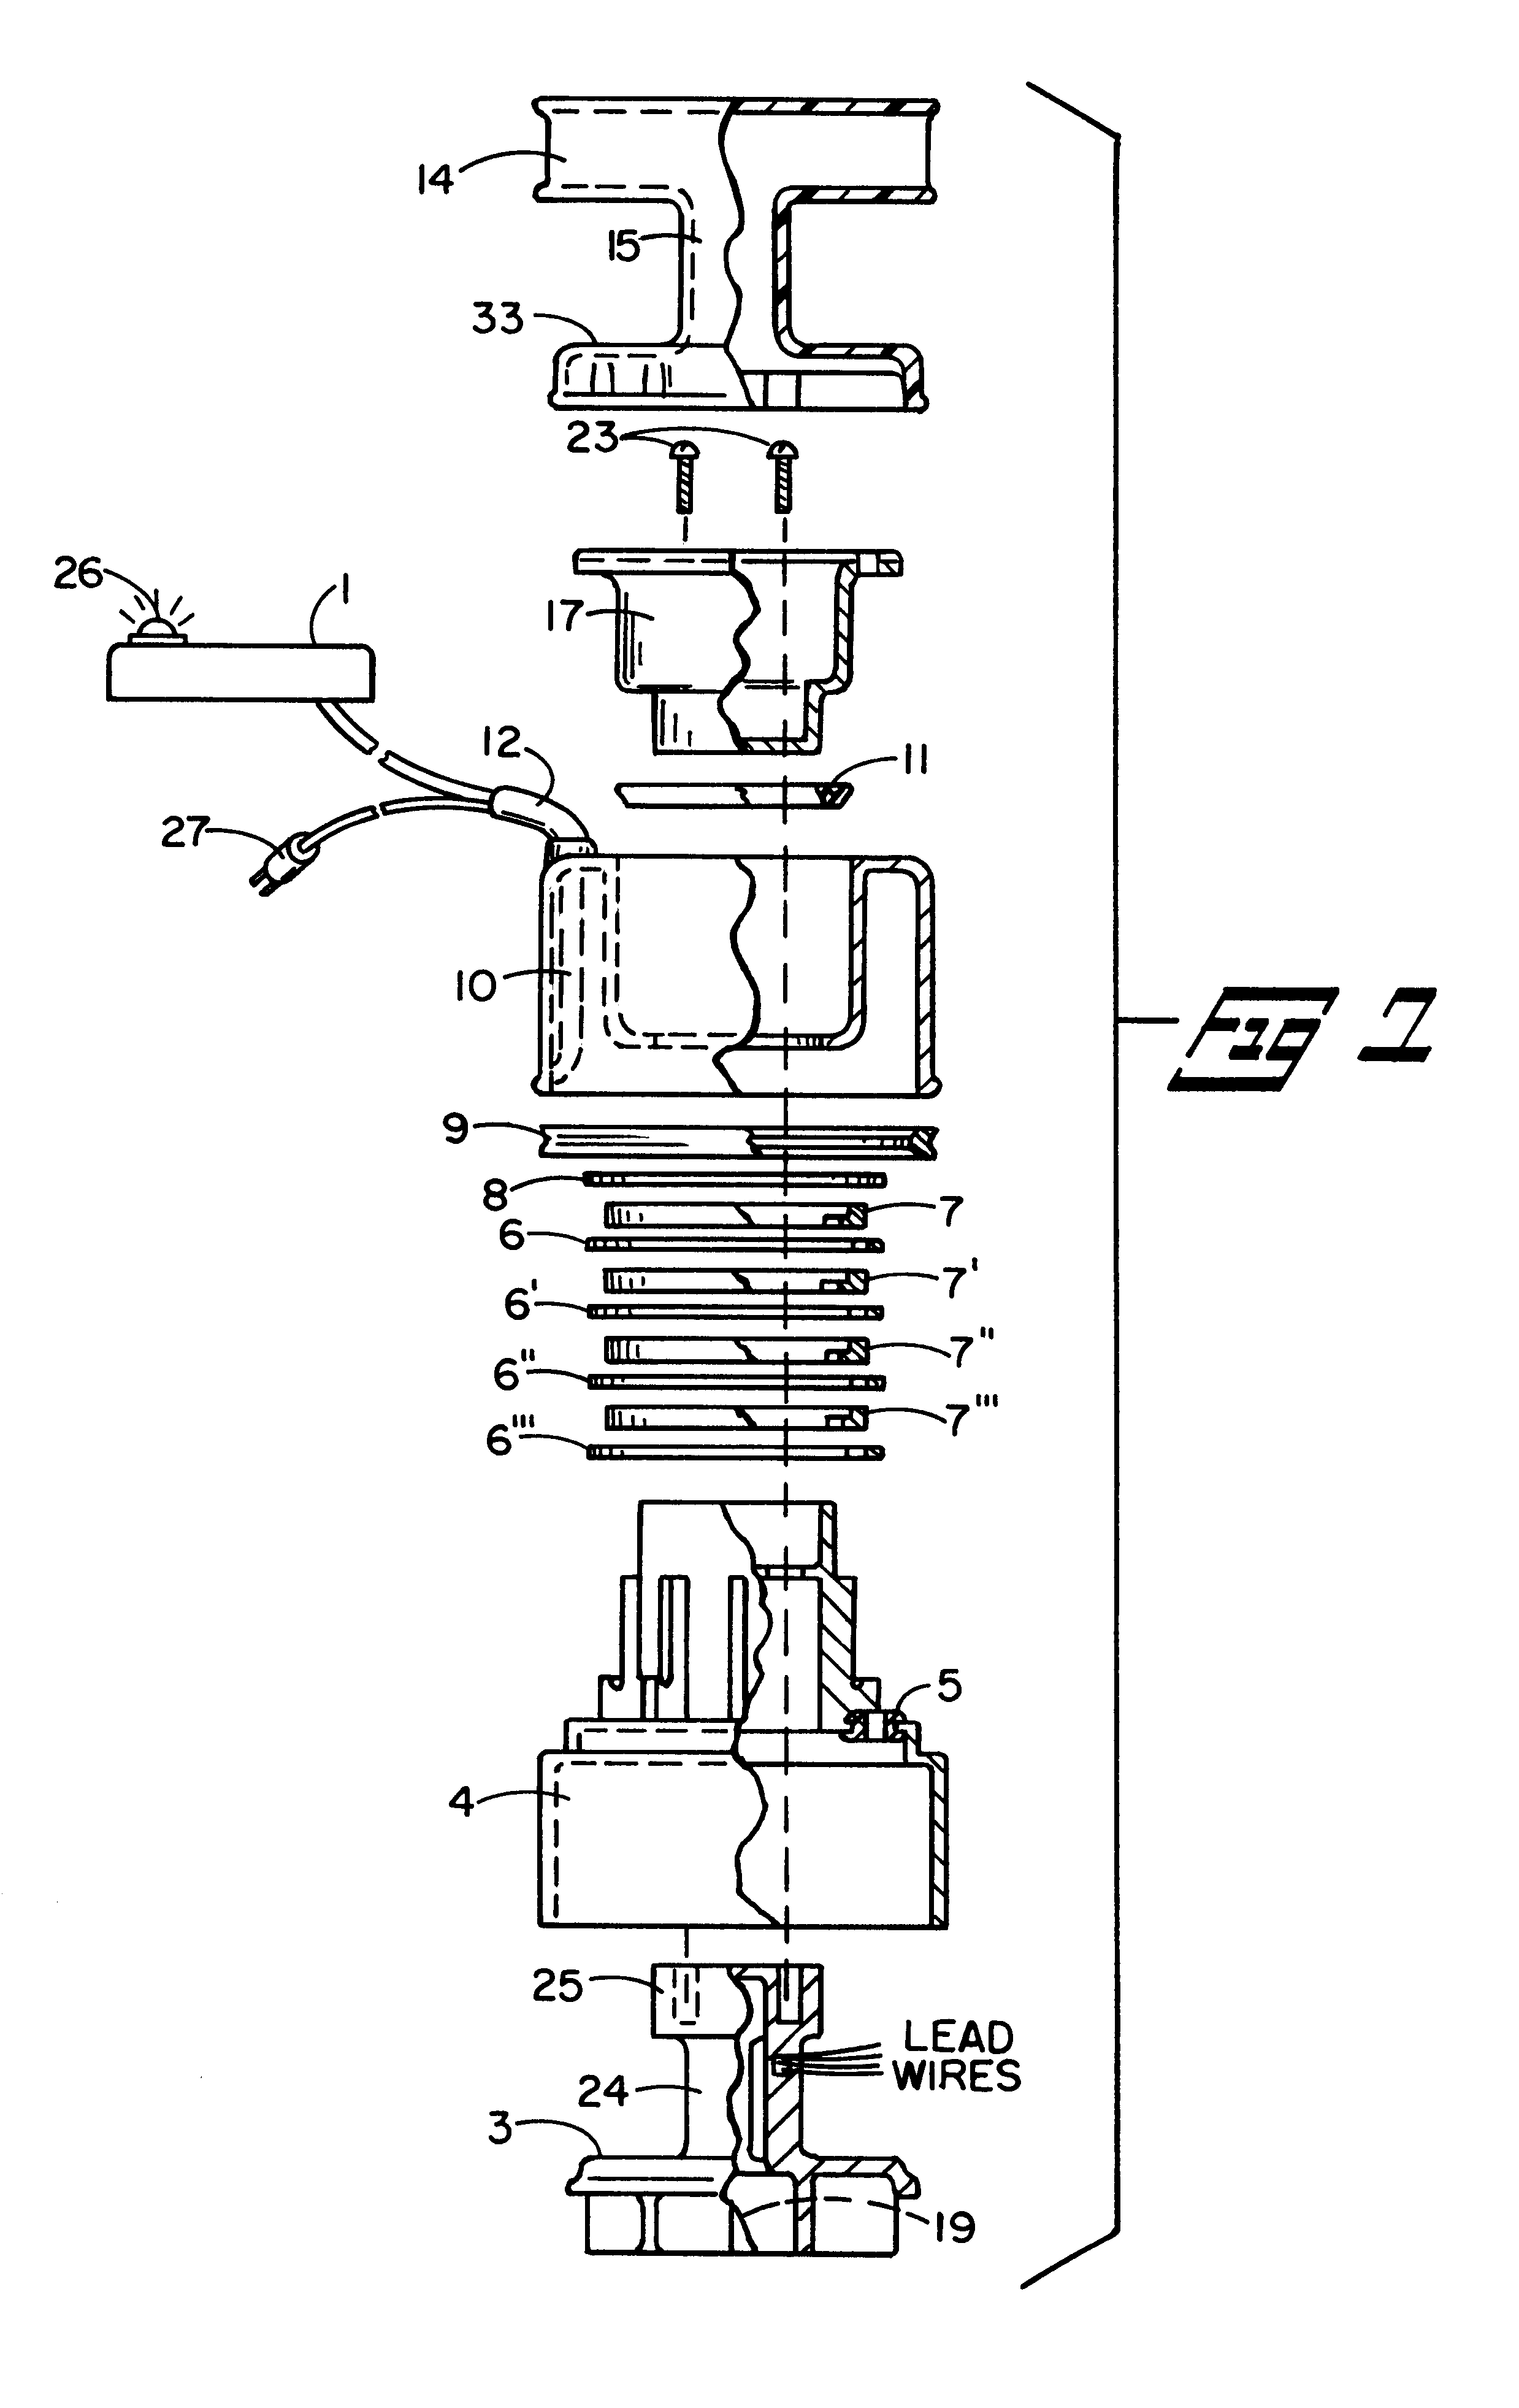 Apparatus and method for monitoring motor vehicle fuel tank cap